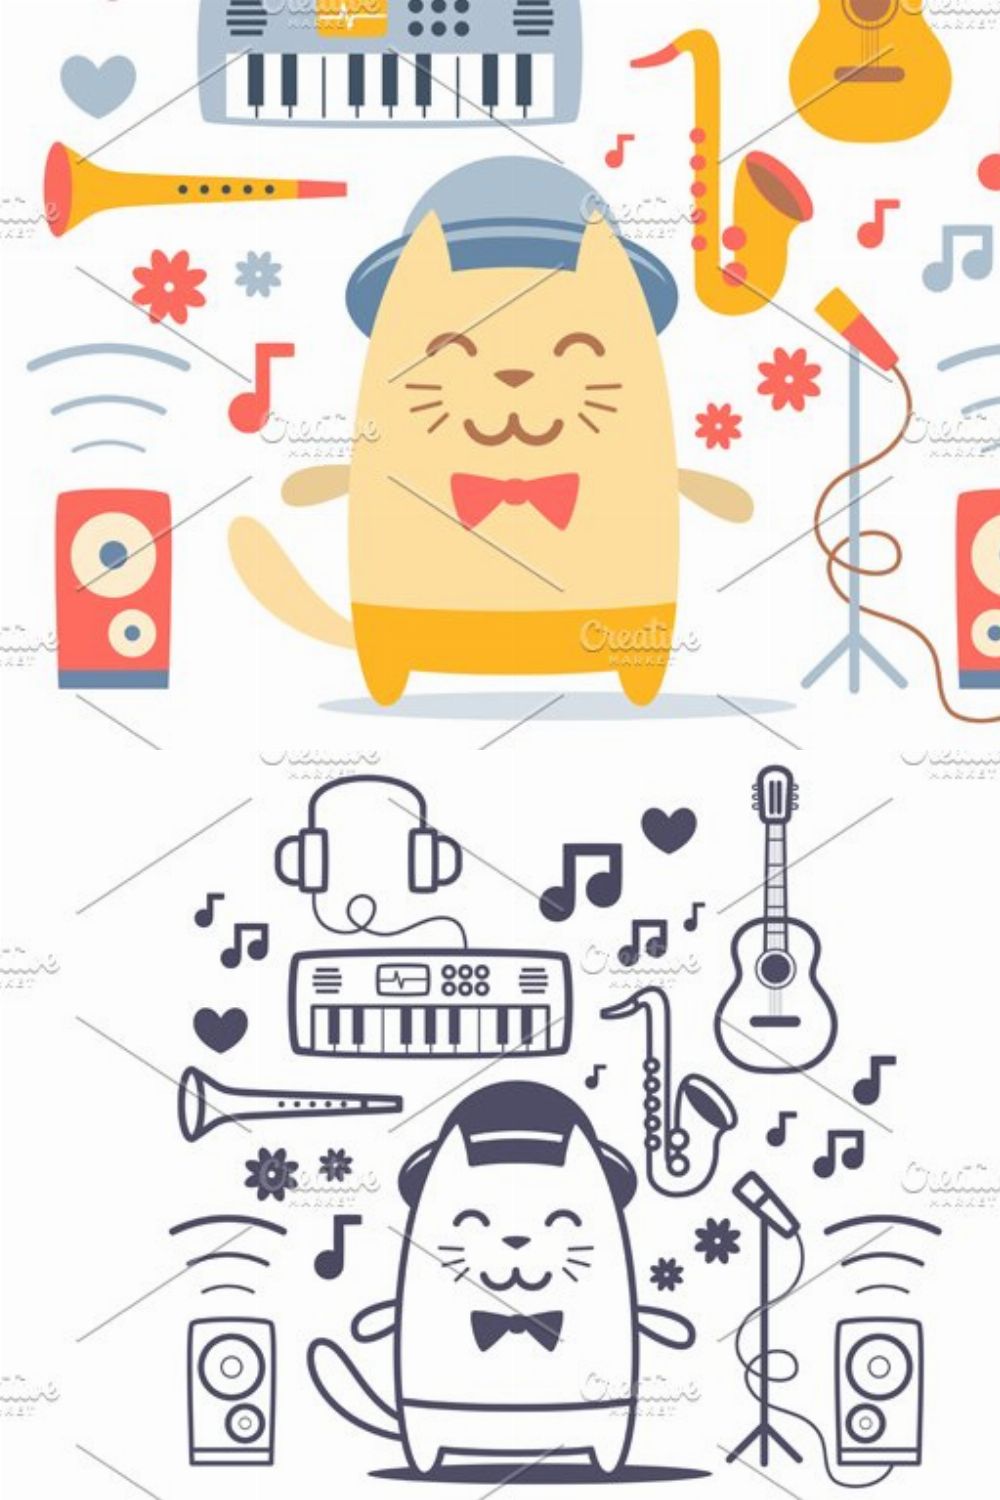 Сat musician with set of instruments pinterest preview image.